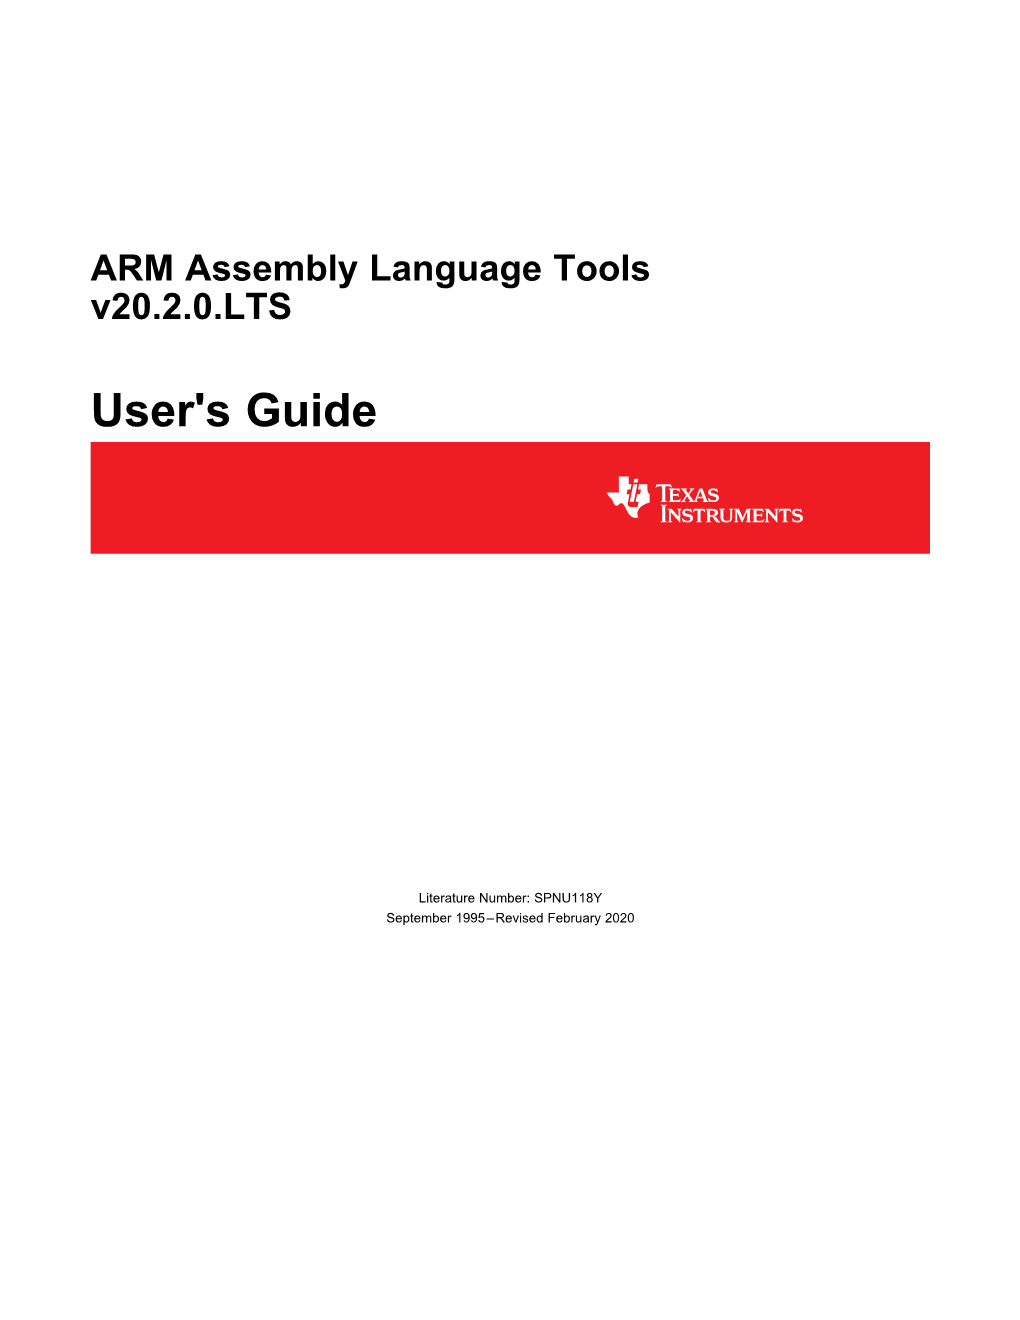 ARM Assembly Language Tools V20.2.0.LTS User's Guide (Rev. Y)